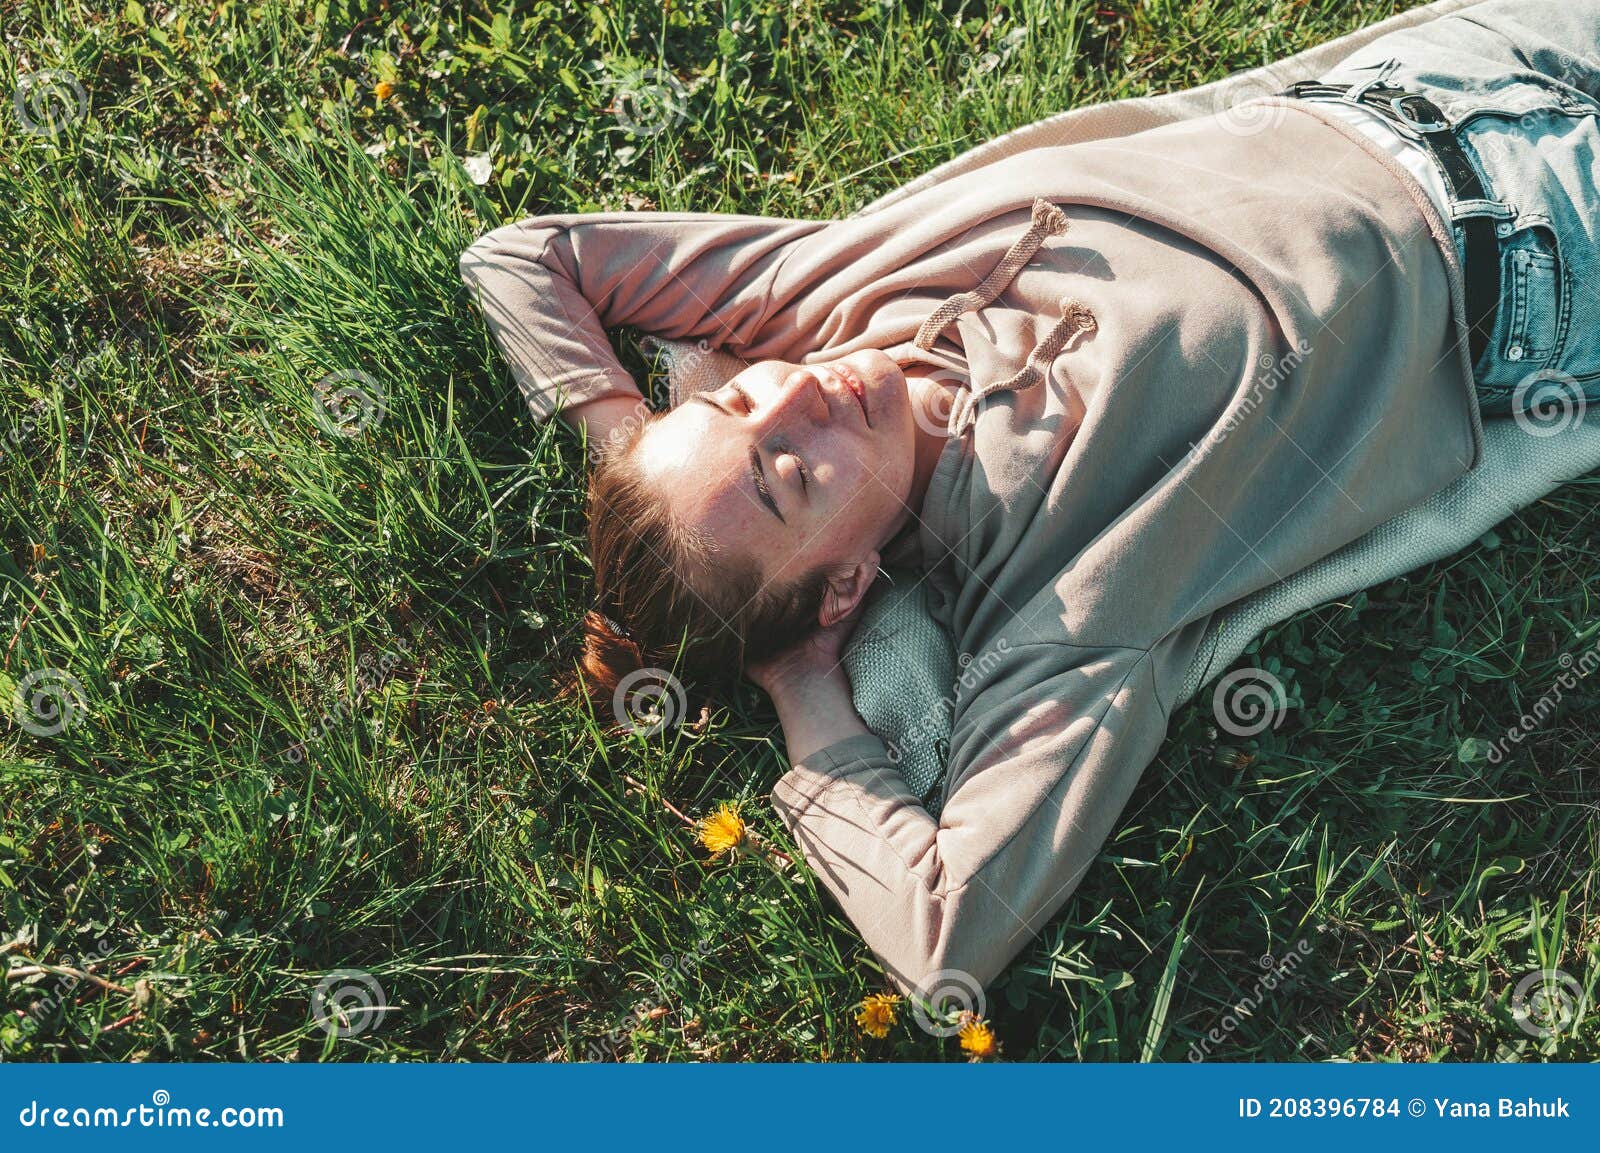 beautiful young woman lying on a field, green grass and dandelion flowers. outdoors enjoy nature. healthy smiling girl lying in